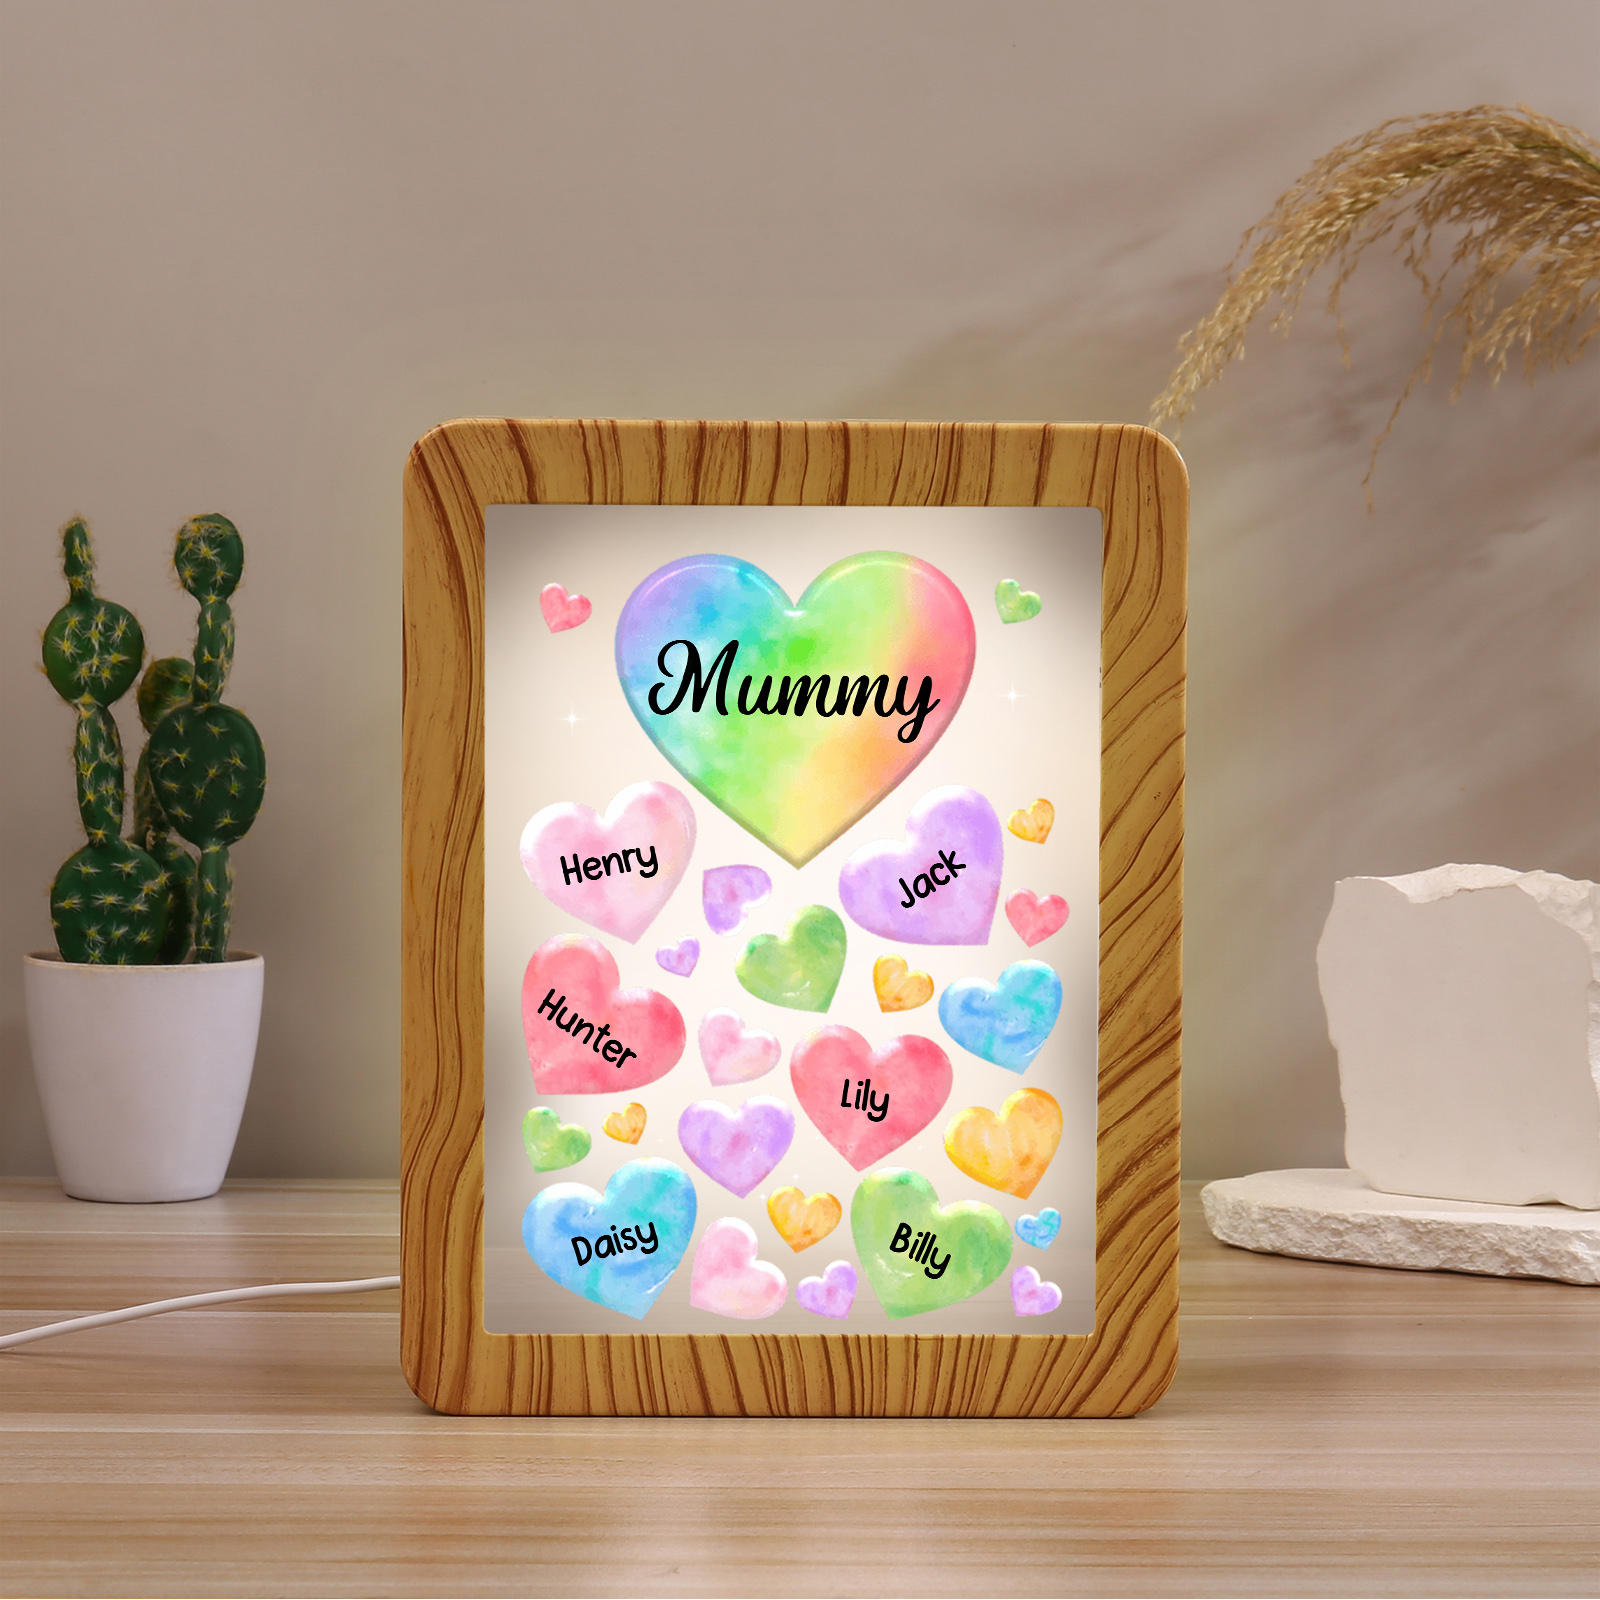 6 Name - Personalized Mum Home Wood Color Plug-in Mirror Photo Frame Custom Text LED Night Light Gift for Mum